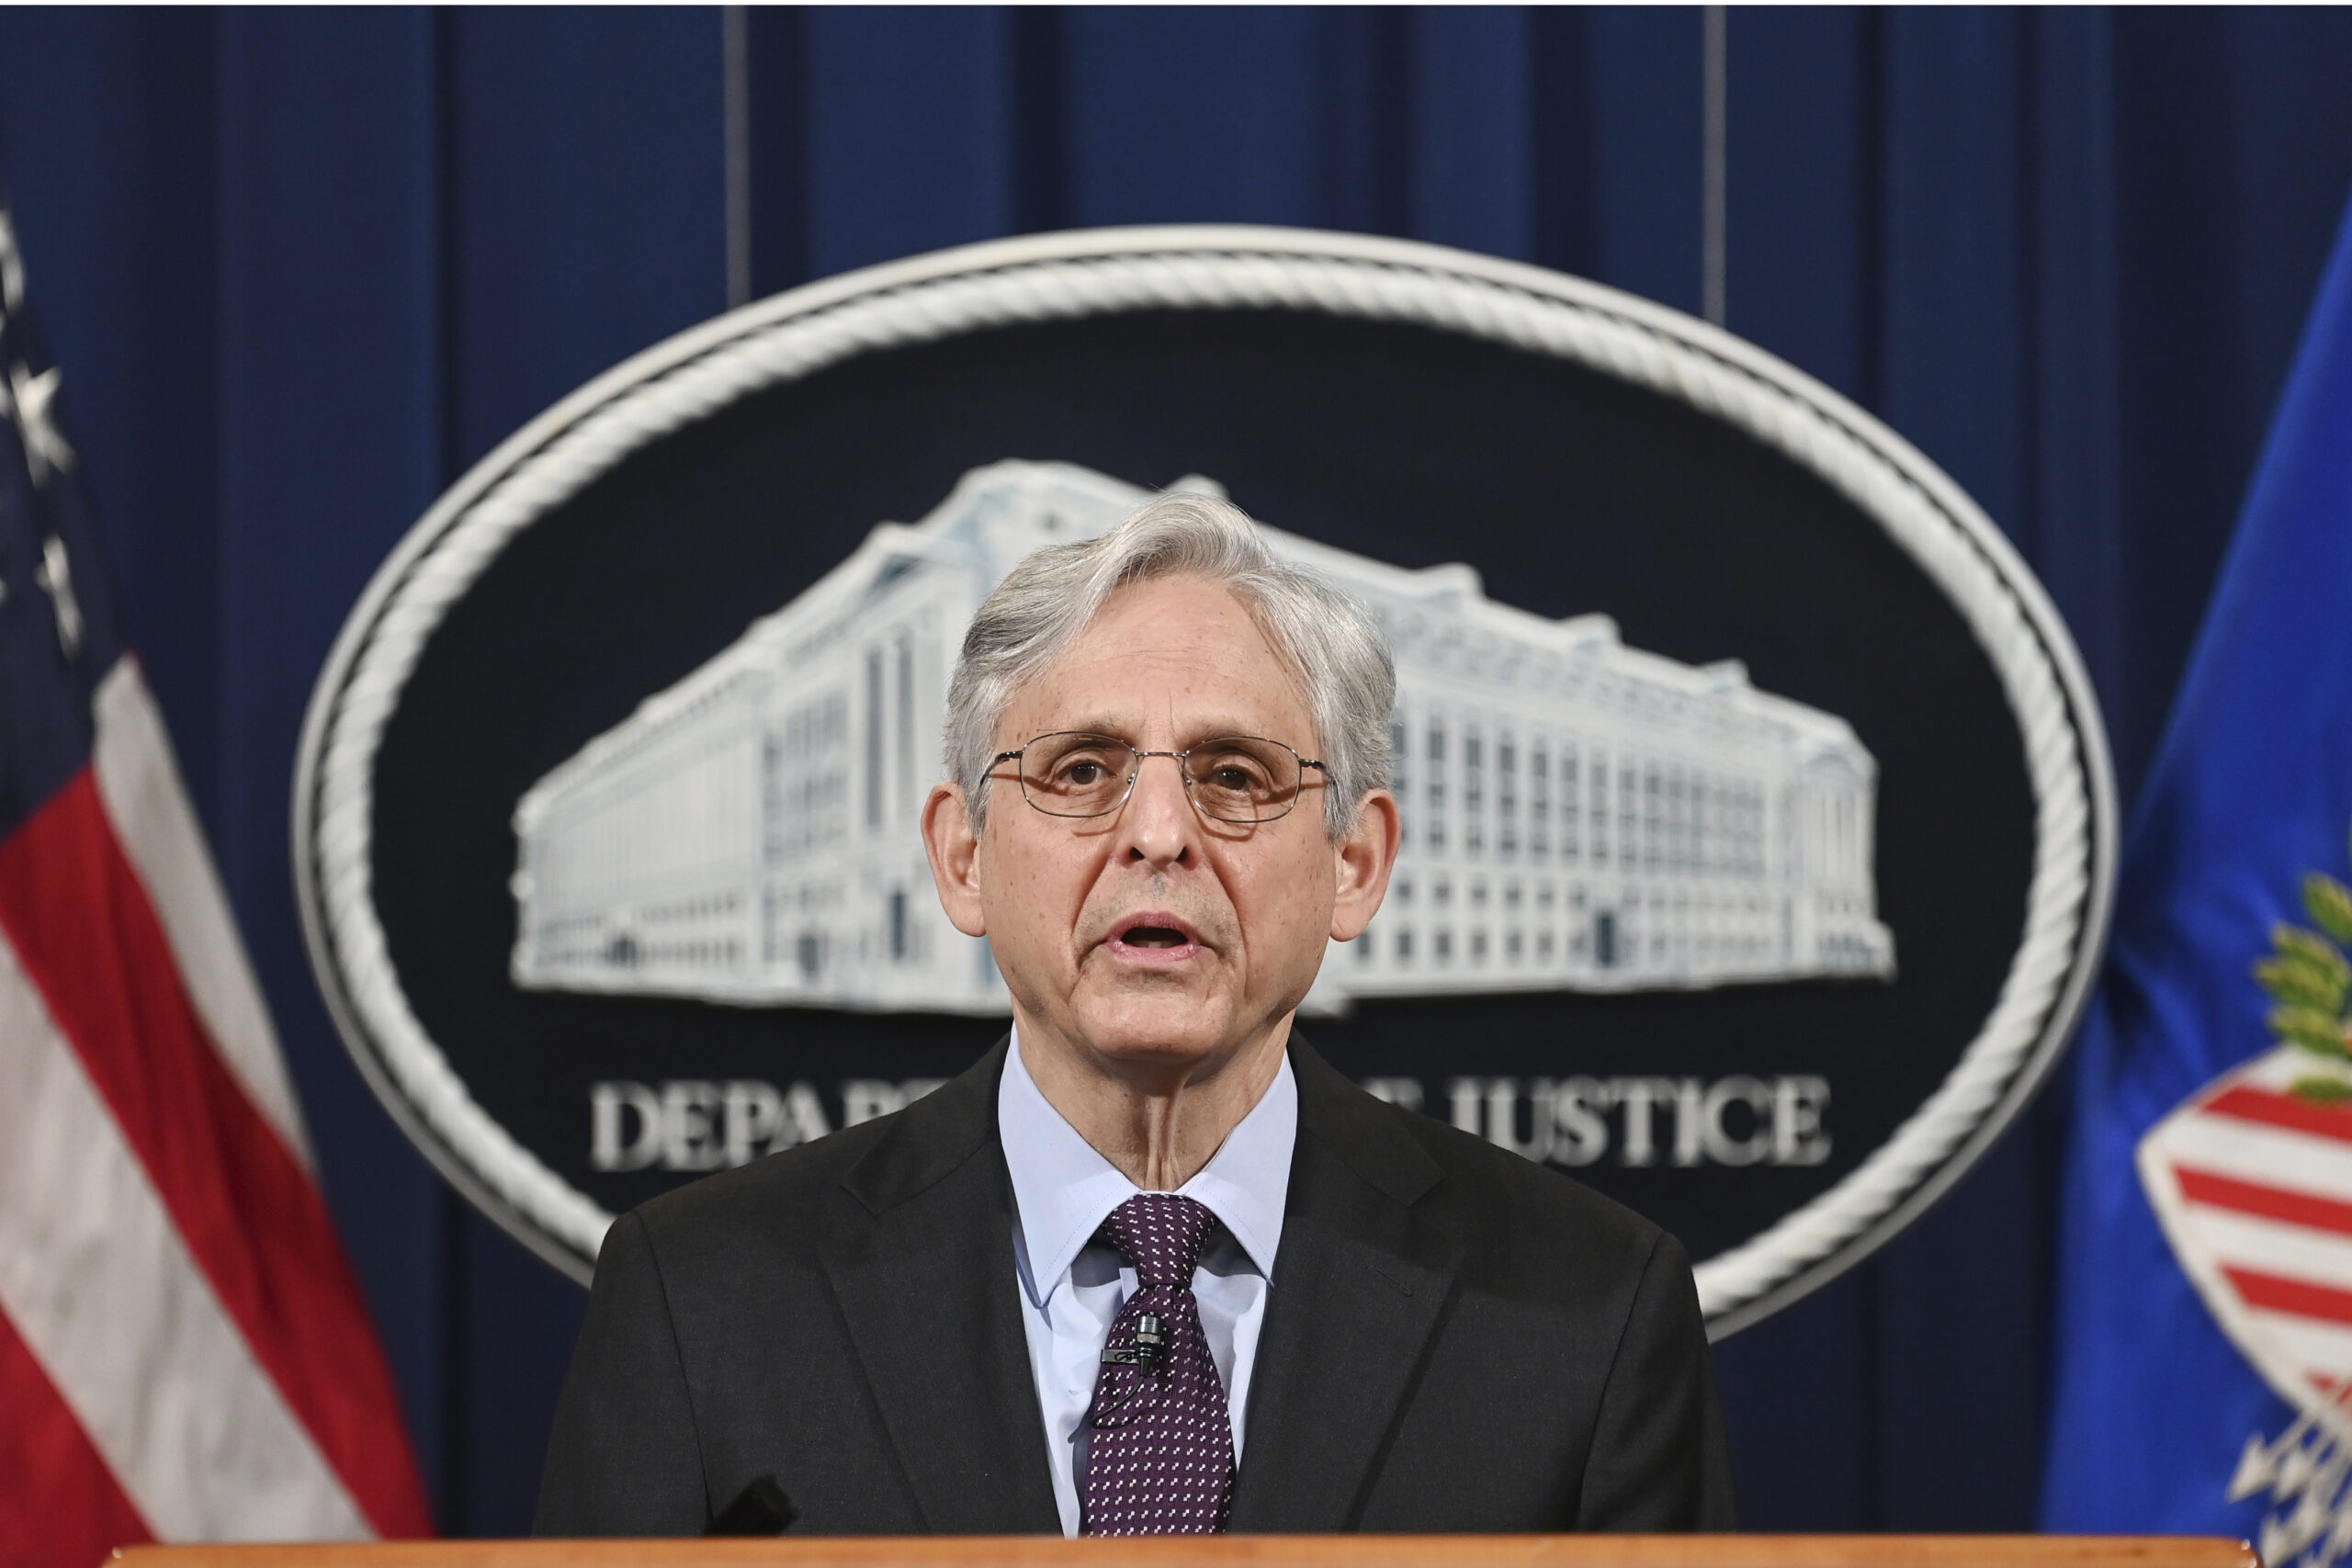 Attorney General Merrick Garland speaks at the Department of Justice in Washington, Monday, April 26, 2021. The Justice Department is opening a sweeping probe into policing in Louisville after the March 2020 death of Breonna Taylor, who was shot to death by police during a raid at her home. (Mandel Ngan/Pool via AP)